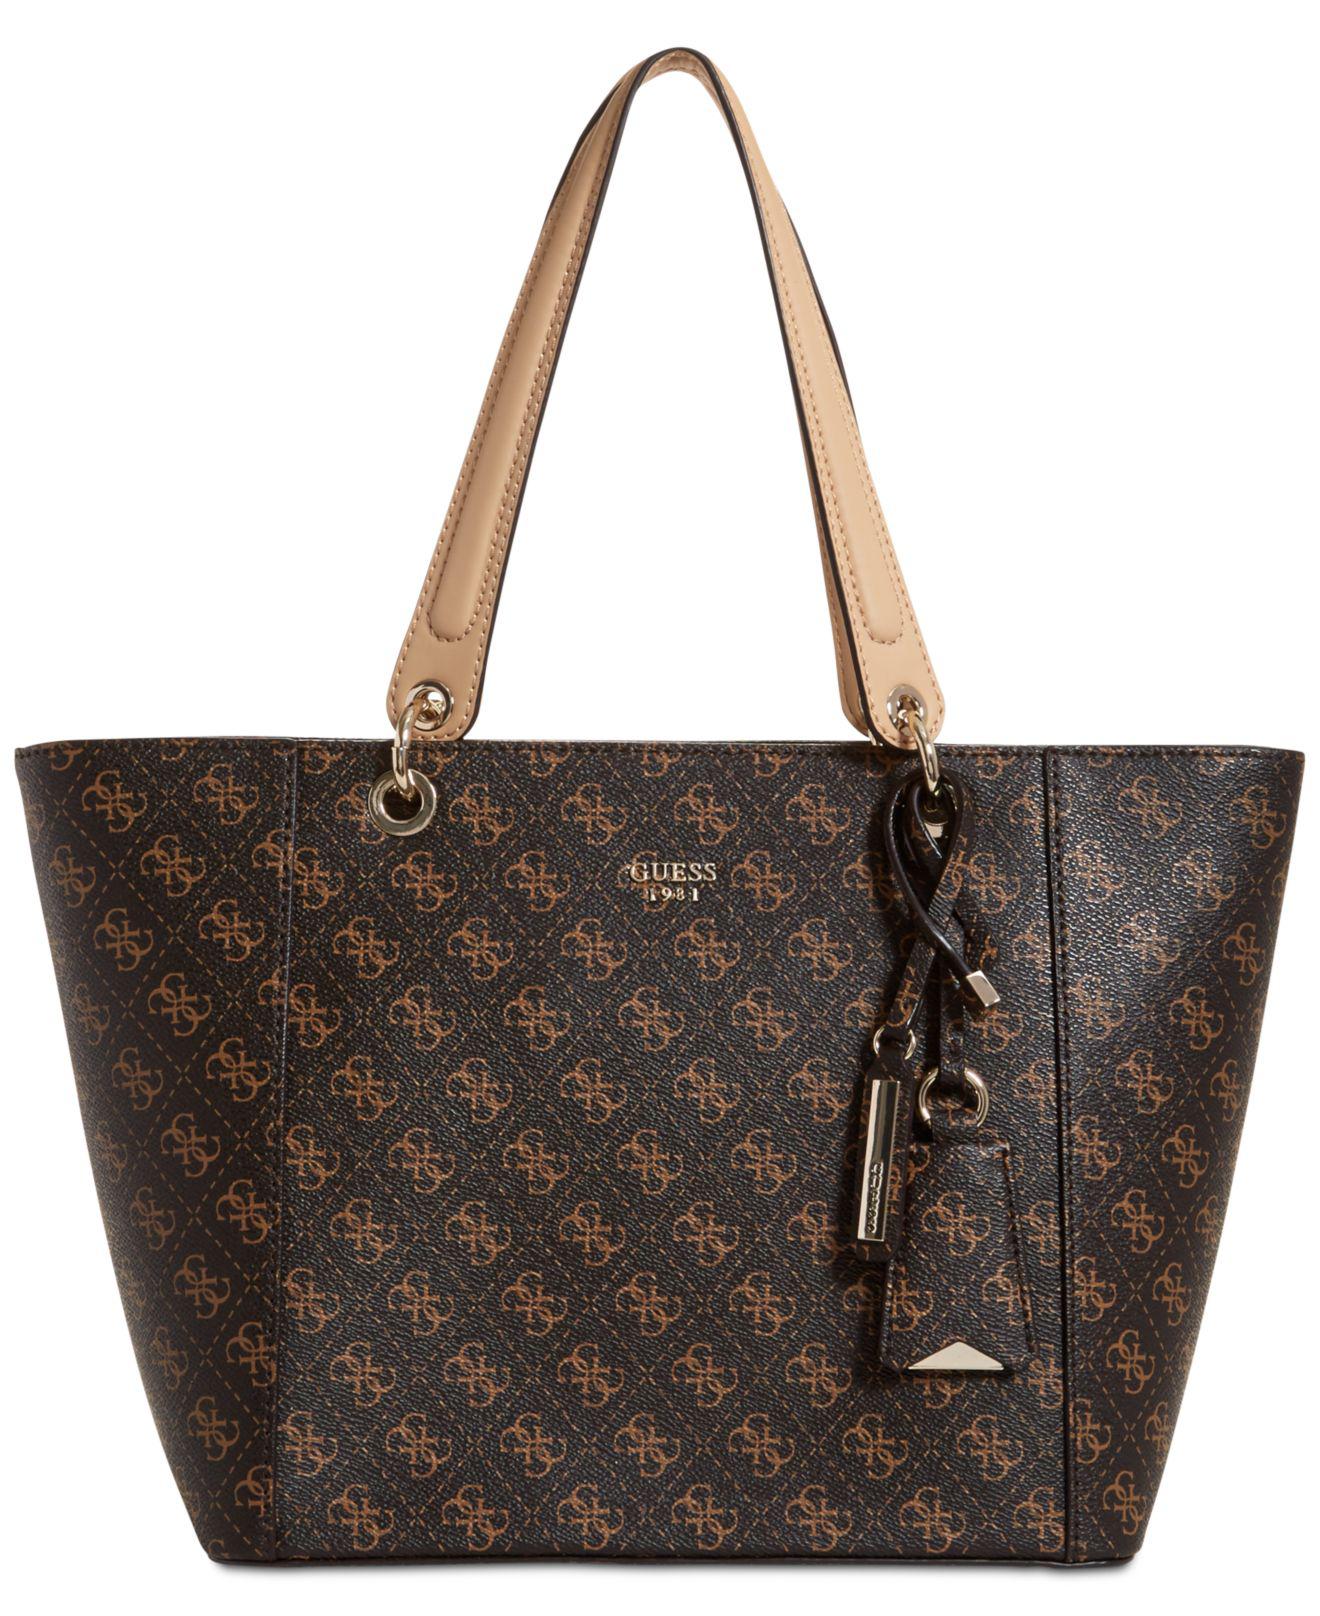 Guess Kamryn Extra-large Tote in Brown/Gold (Brown) - Lyst